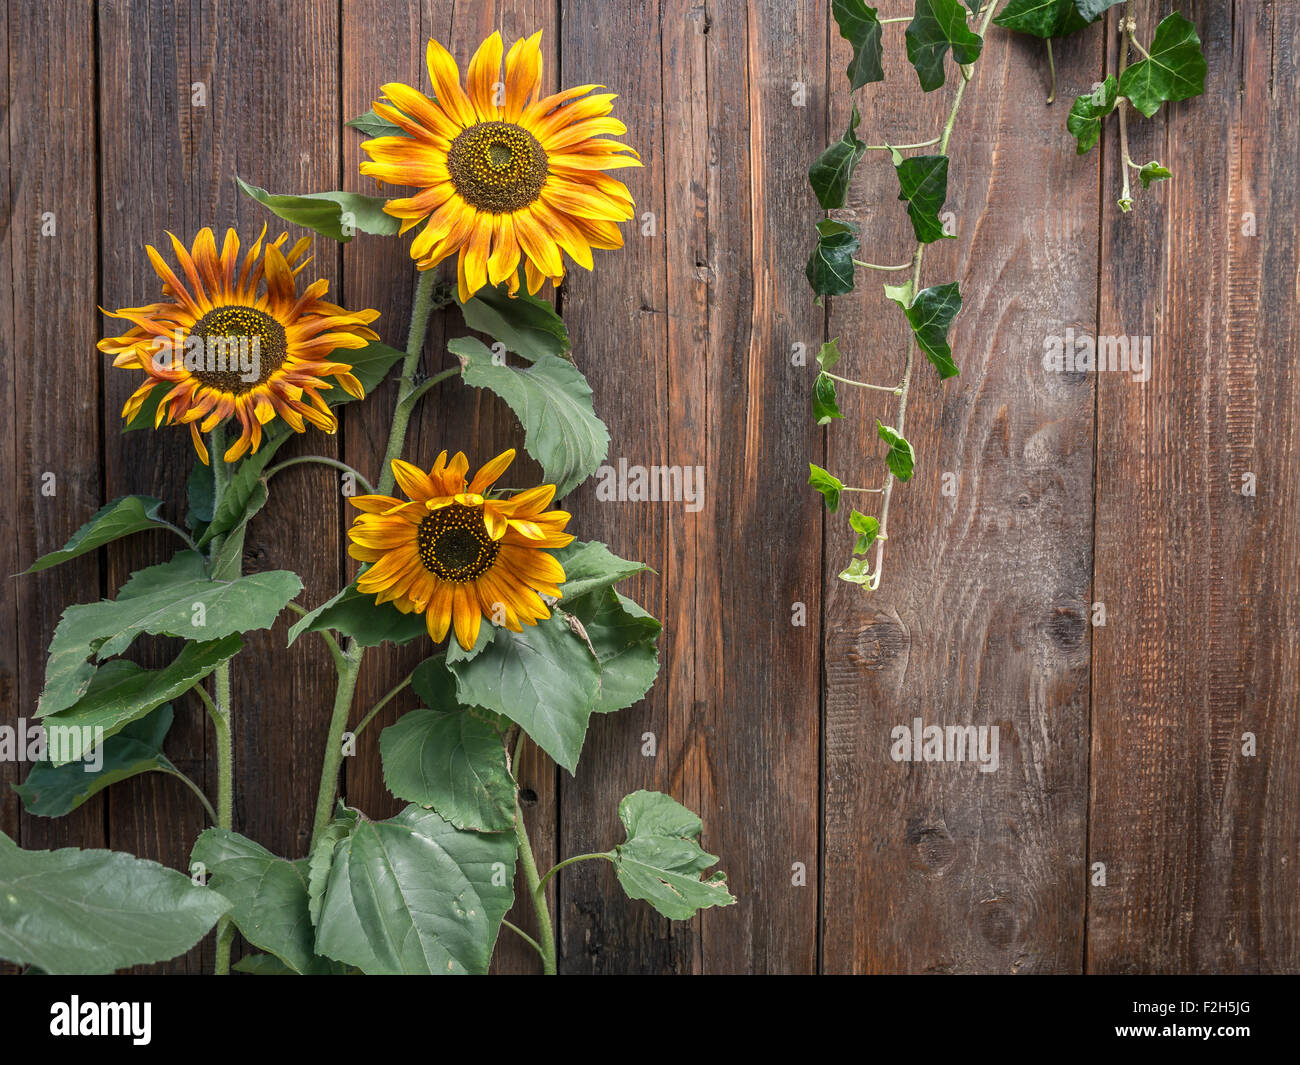 Three sunflowers growing against rustic wooden plank wall Stock Photo